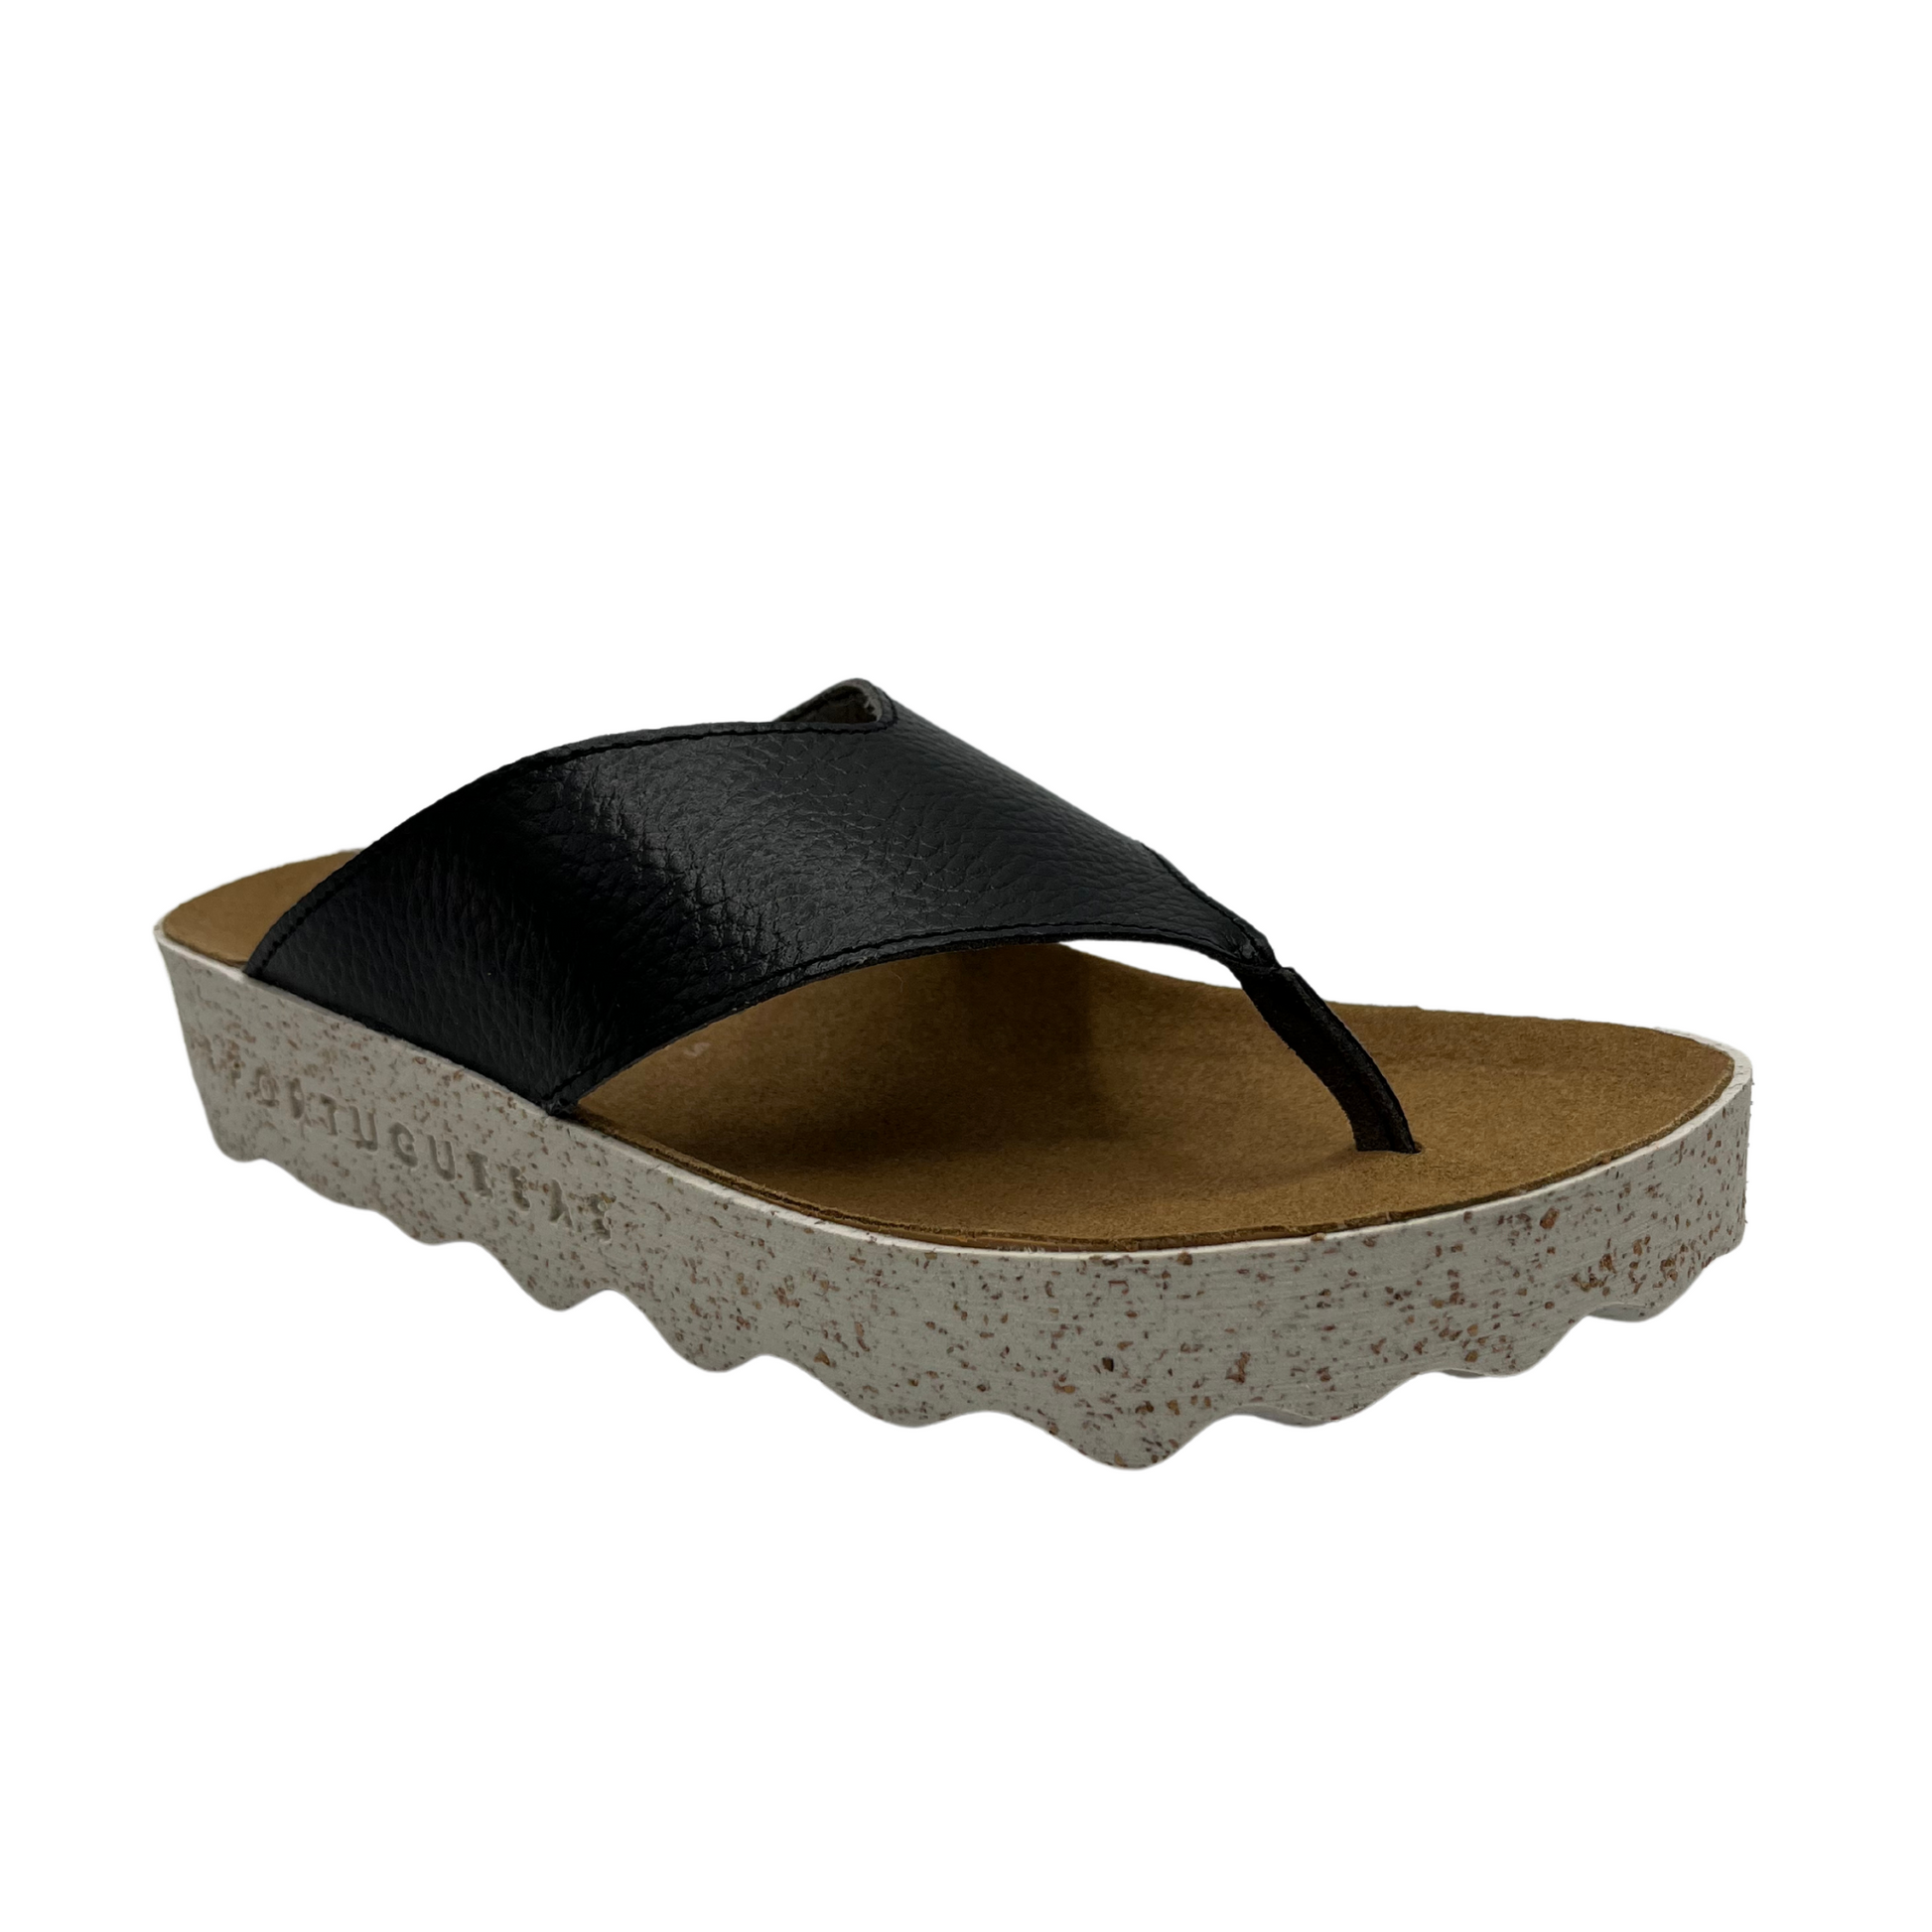 45 degree angled view of black strapped thong sandal with brown contoured footbed and white speckled outsole